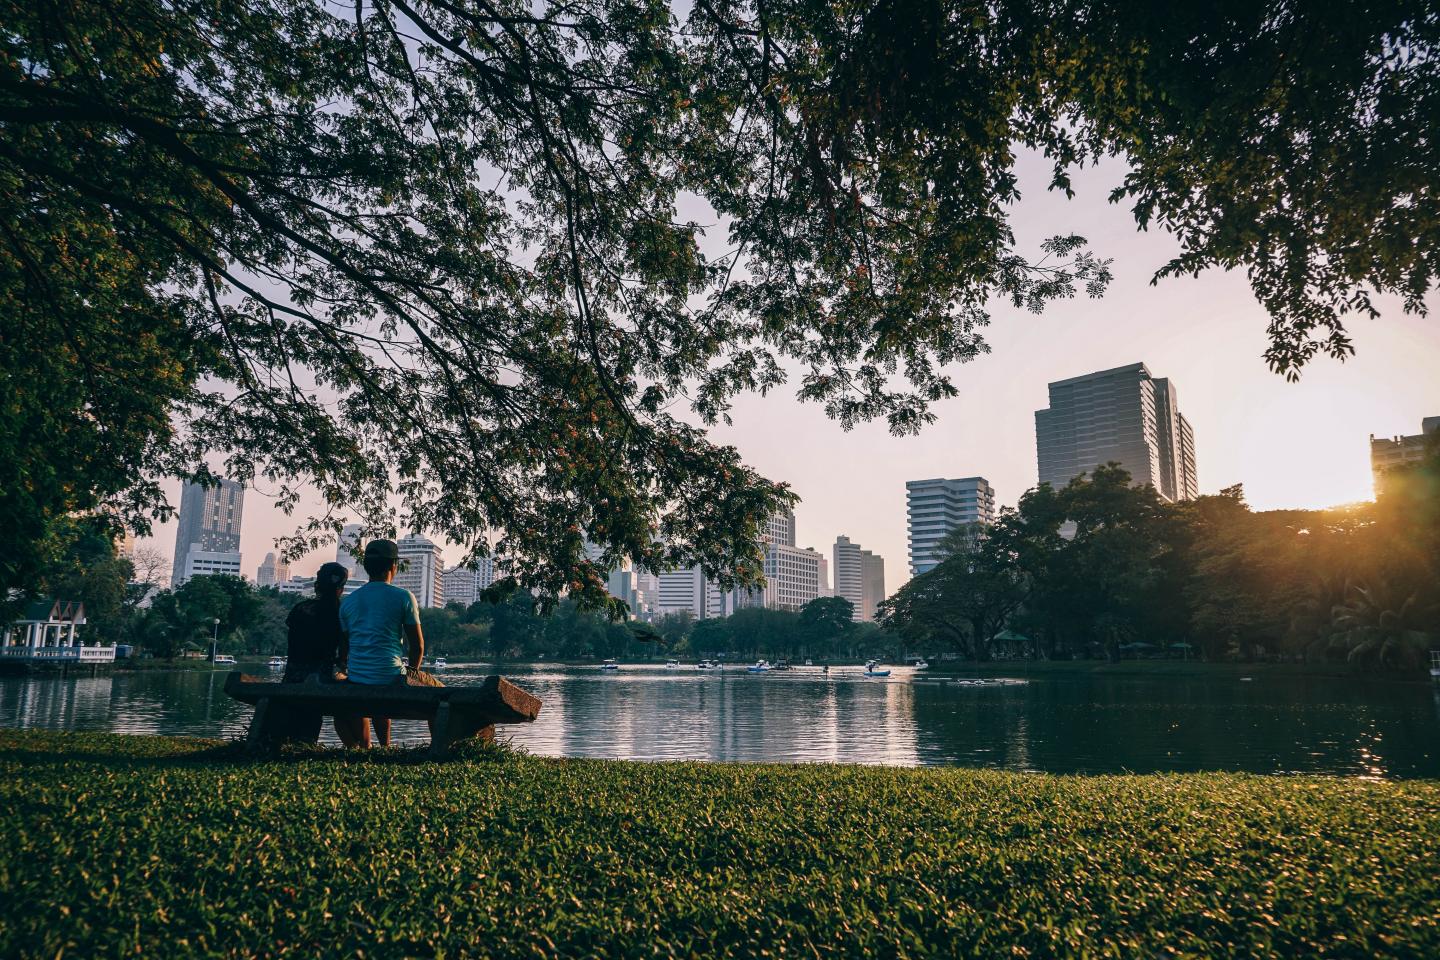 Couple Sitting on Bench Near Body of Water